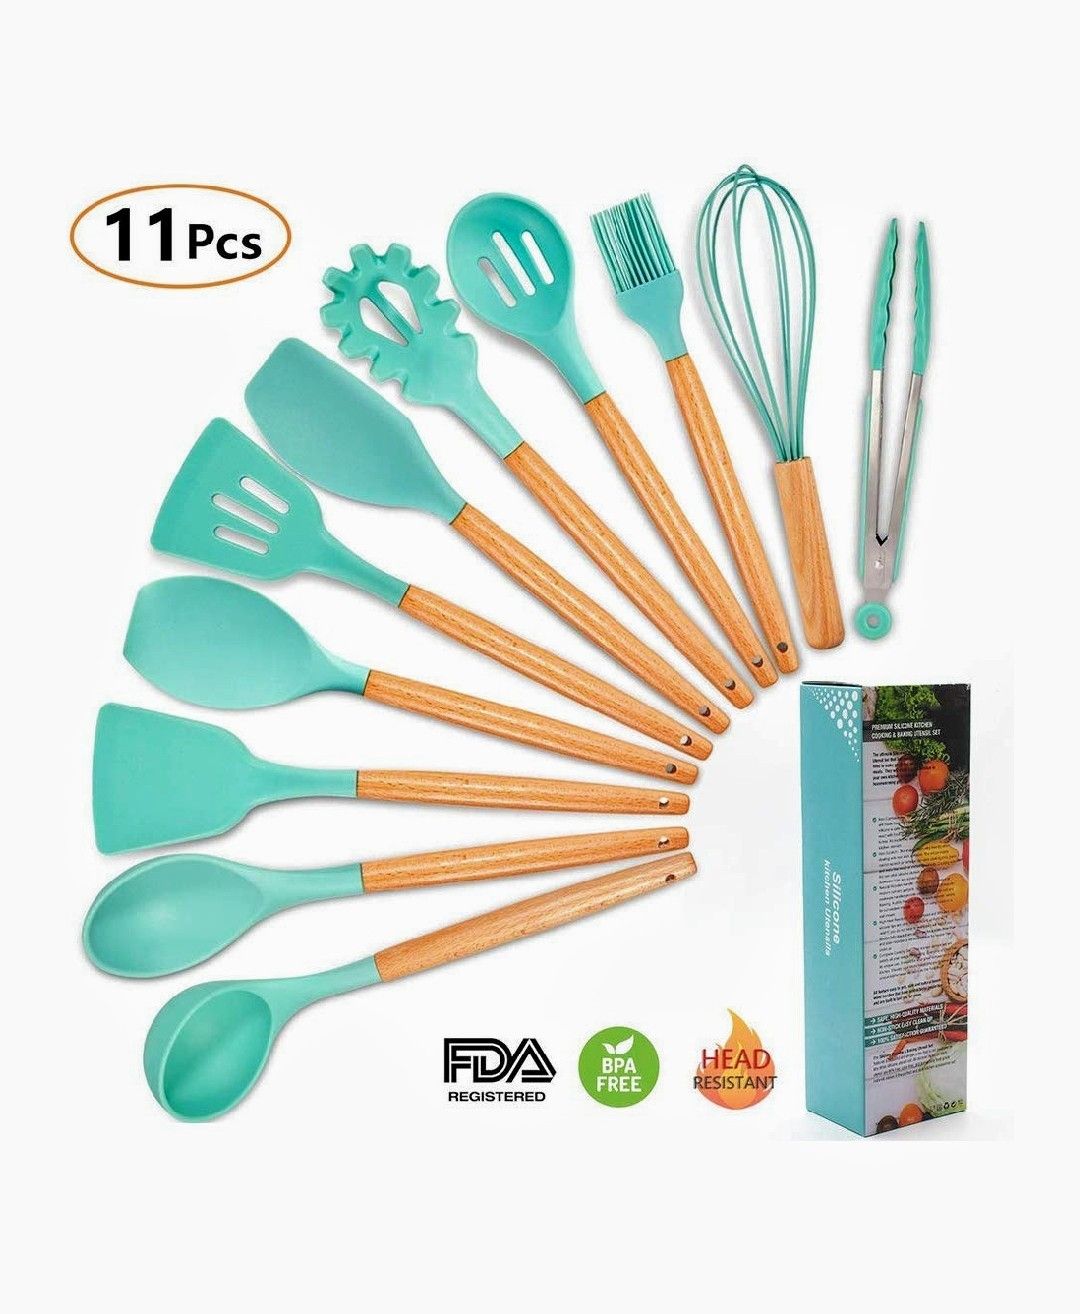 11PCS Silicone Cooking Utensils Kitchen Utensil Set with Wooden Handles, BPA Free Nonstick Non-Scratch and Heat Resistant Cookware Set Great Kitchen